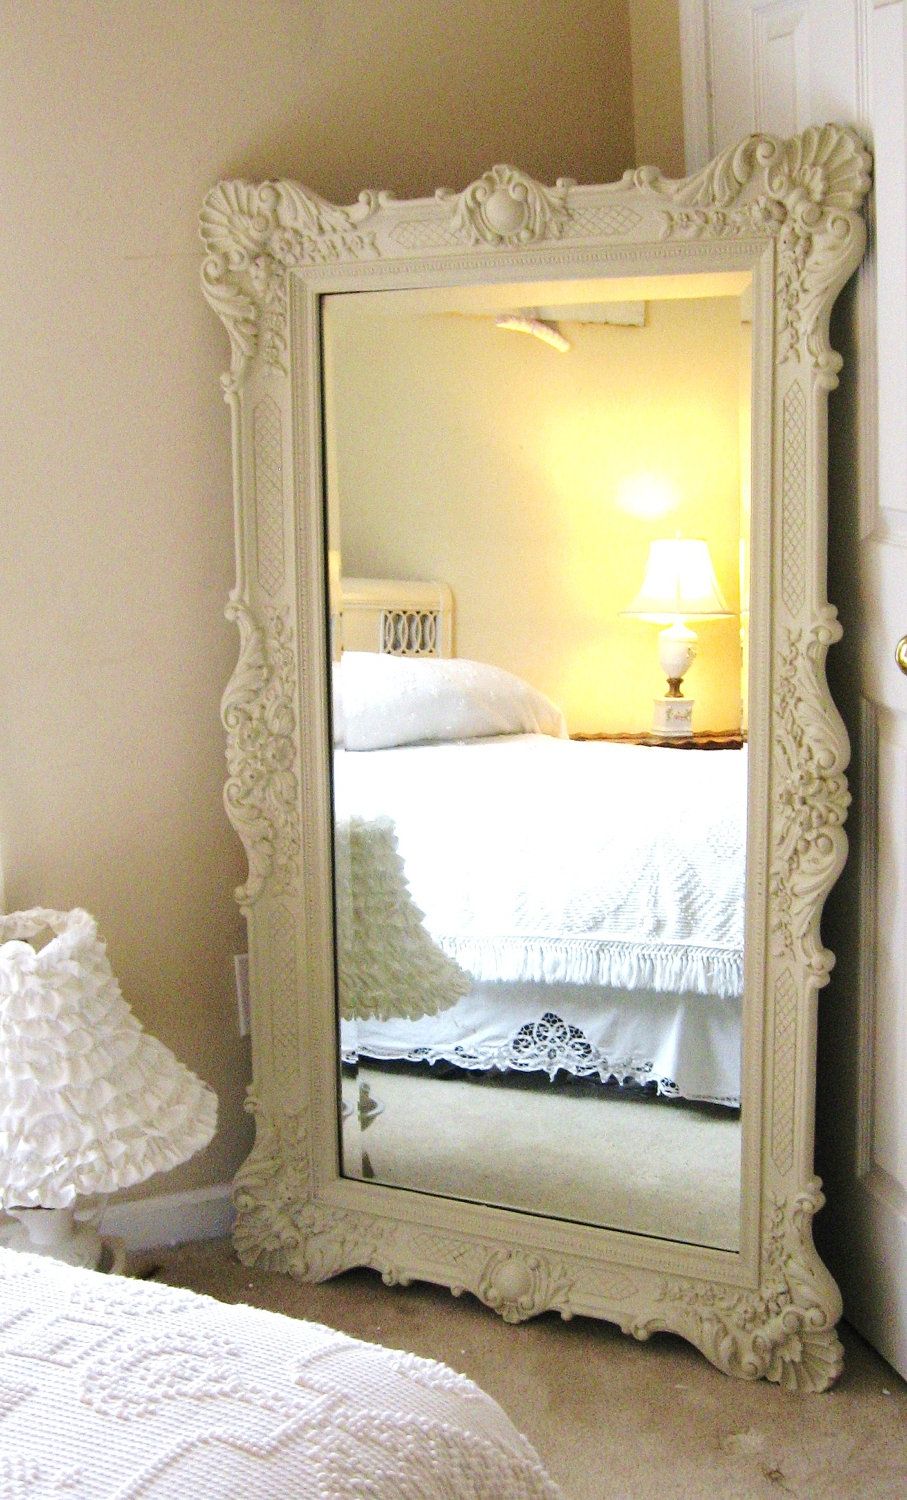 D R E S S I N G Mirror Vintage Leaning Mirror Floor Mirror With Shabby Chic Floor Mirror (View 4 of 15)